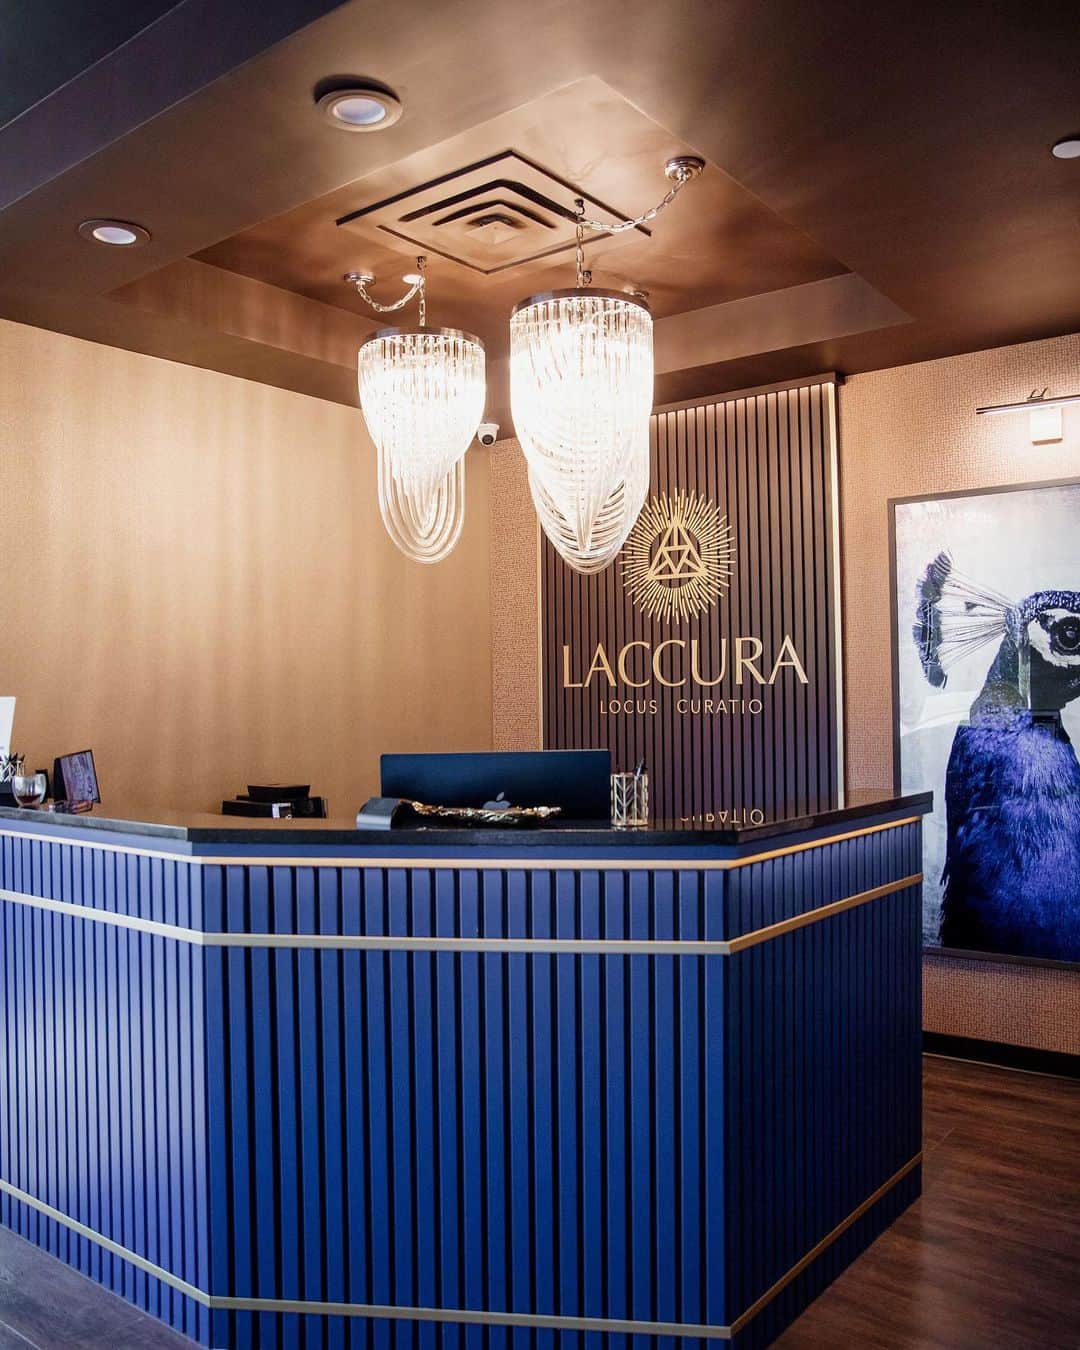 Biologique Recherche USAのインスタグラム：「Cheers to 1 year of partnership with Laccura Medical Spa and Wellness Center located in Highland Park, Illinois🥂✨  @laccuramedspa offers medical, aesthetic and rejuvenation treatments in a modern luxury setting. Their treatments are based on unique and personalized skincare protocols adapted to every Skin Instant©.    Your journey to new heights of beauty, health and well-being begins here.   Ask about our exfoliating and renovating Lotion MC 110✨ treatment. Areas with fine lines and wrinkles are immediately plumped, skin texture is refined, and the complexion is left unified and radiant.   📍Find us at Laccura Medical Spa in Highland Park, Illinois.   #BiologiqueRecherche #FollowYourSkinInstant #BuildingBetterSkin #BRspa #medspa #wellnesscenter #laccura」